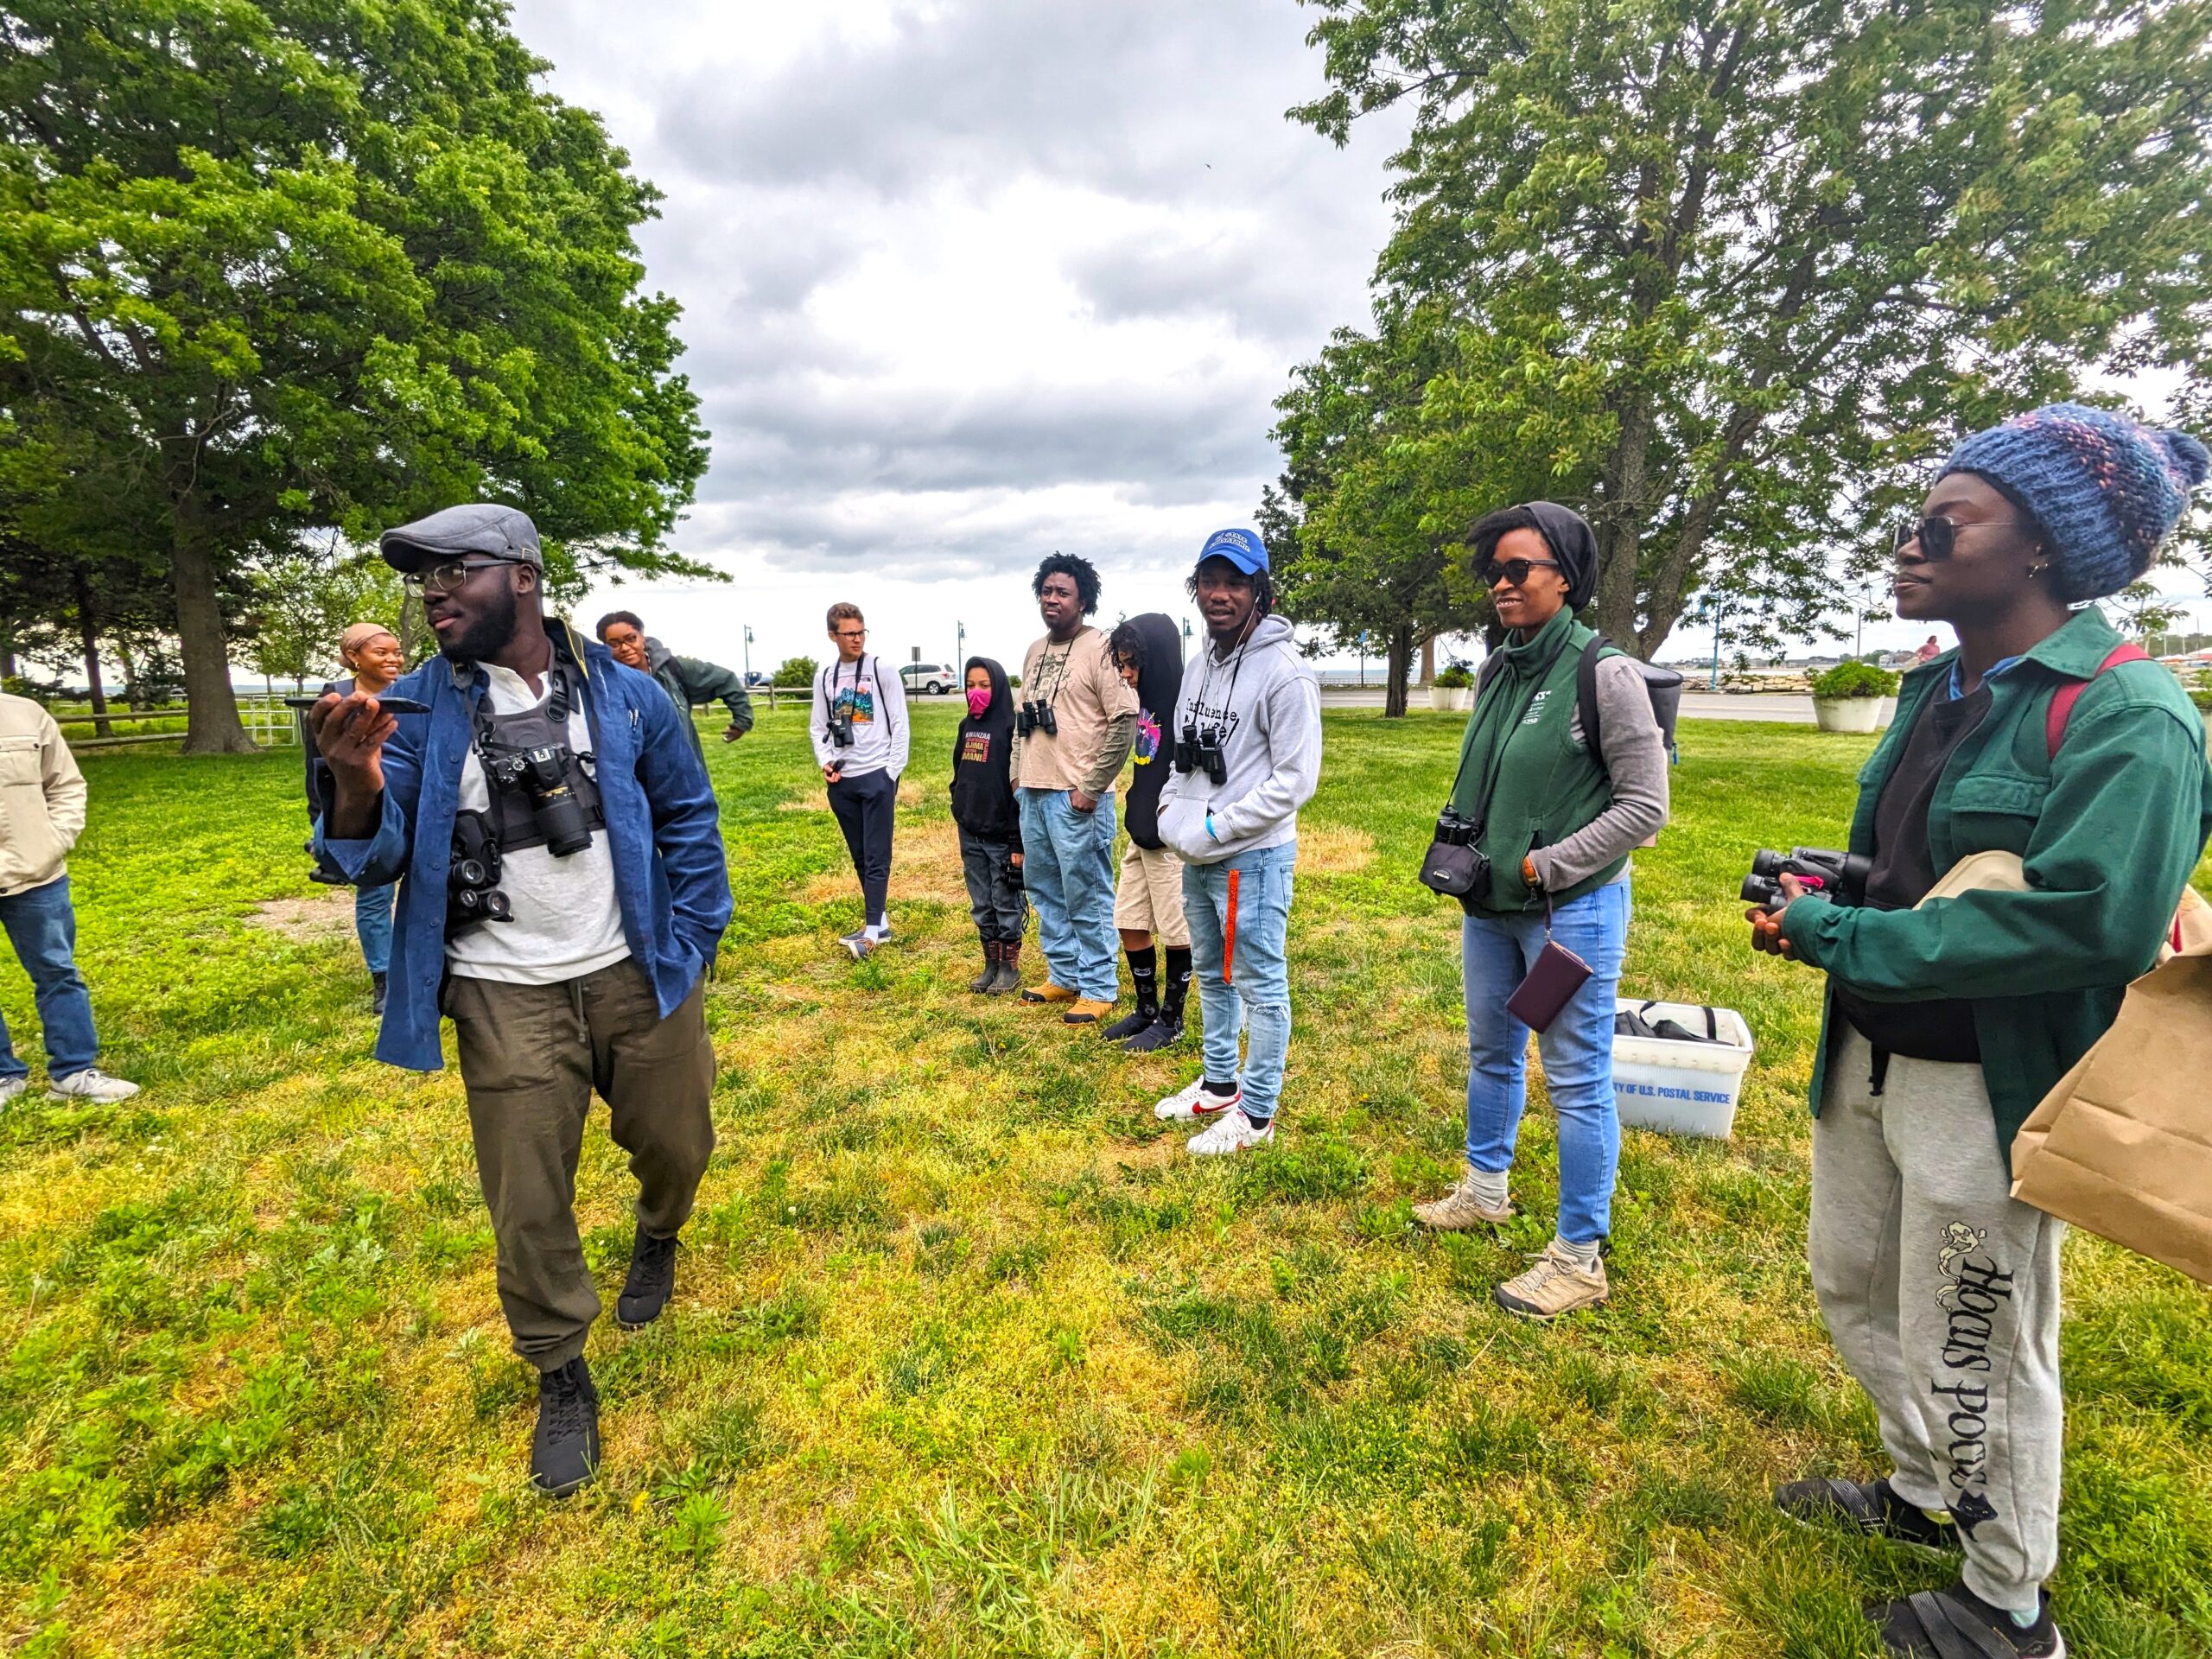 A Bird and Hike event with Sierra Club CT and Black AF in STEM at Aspetuck Land Trust. Photo credit: CLCC